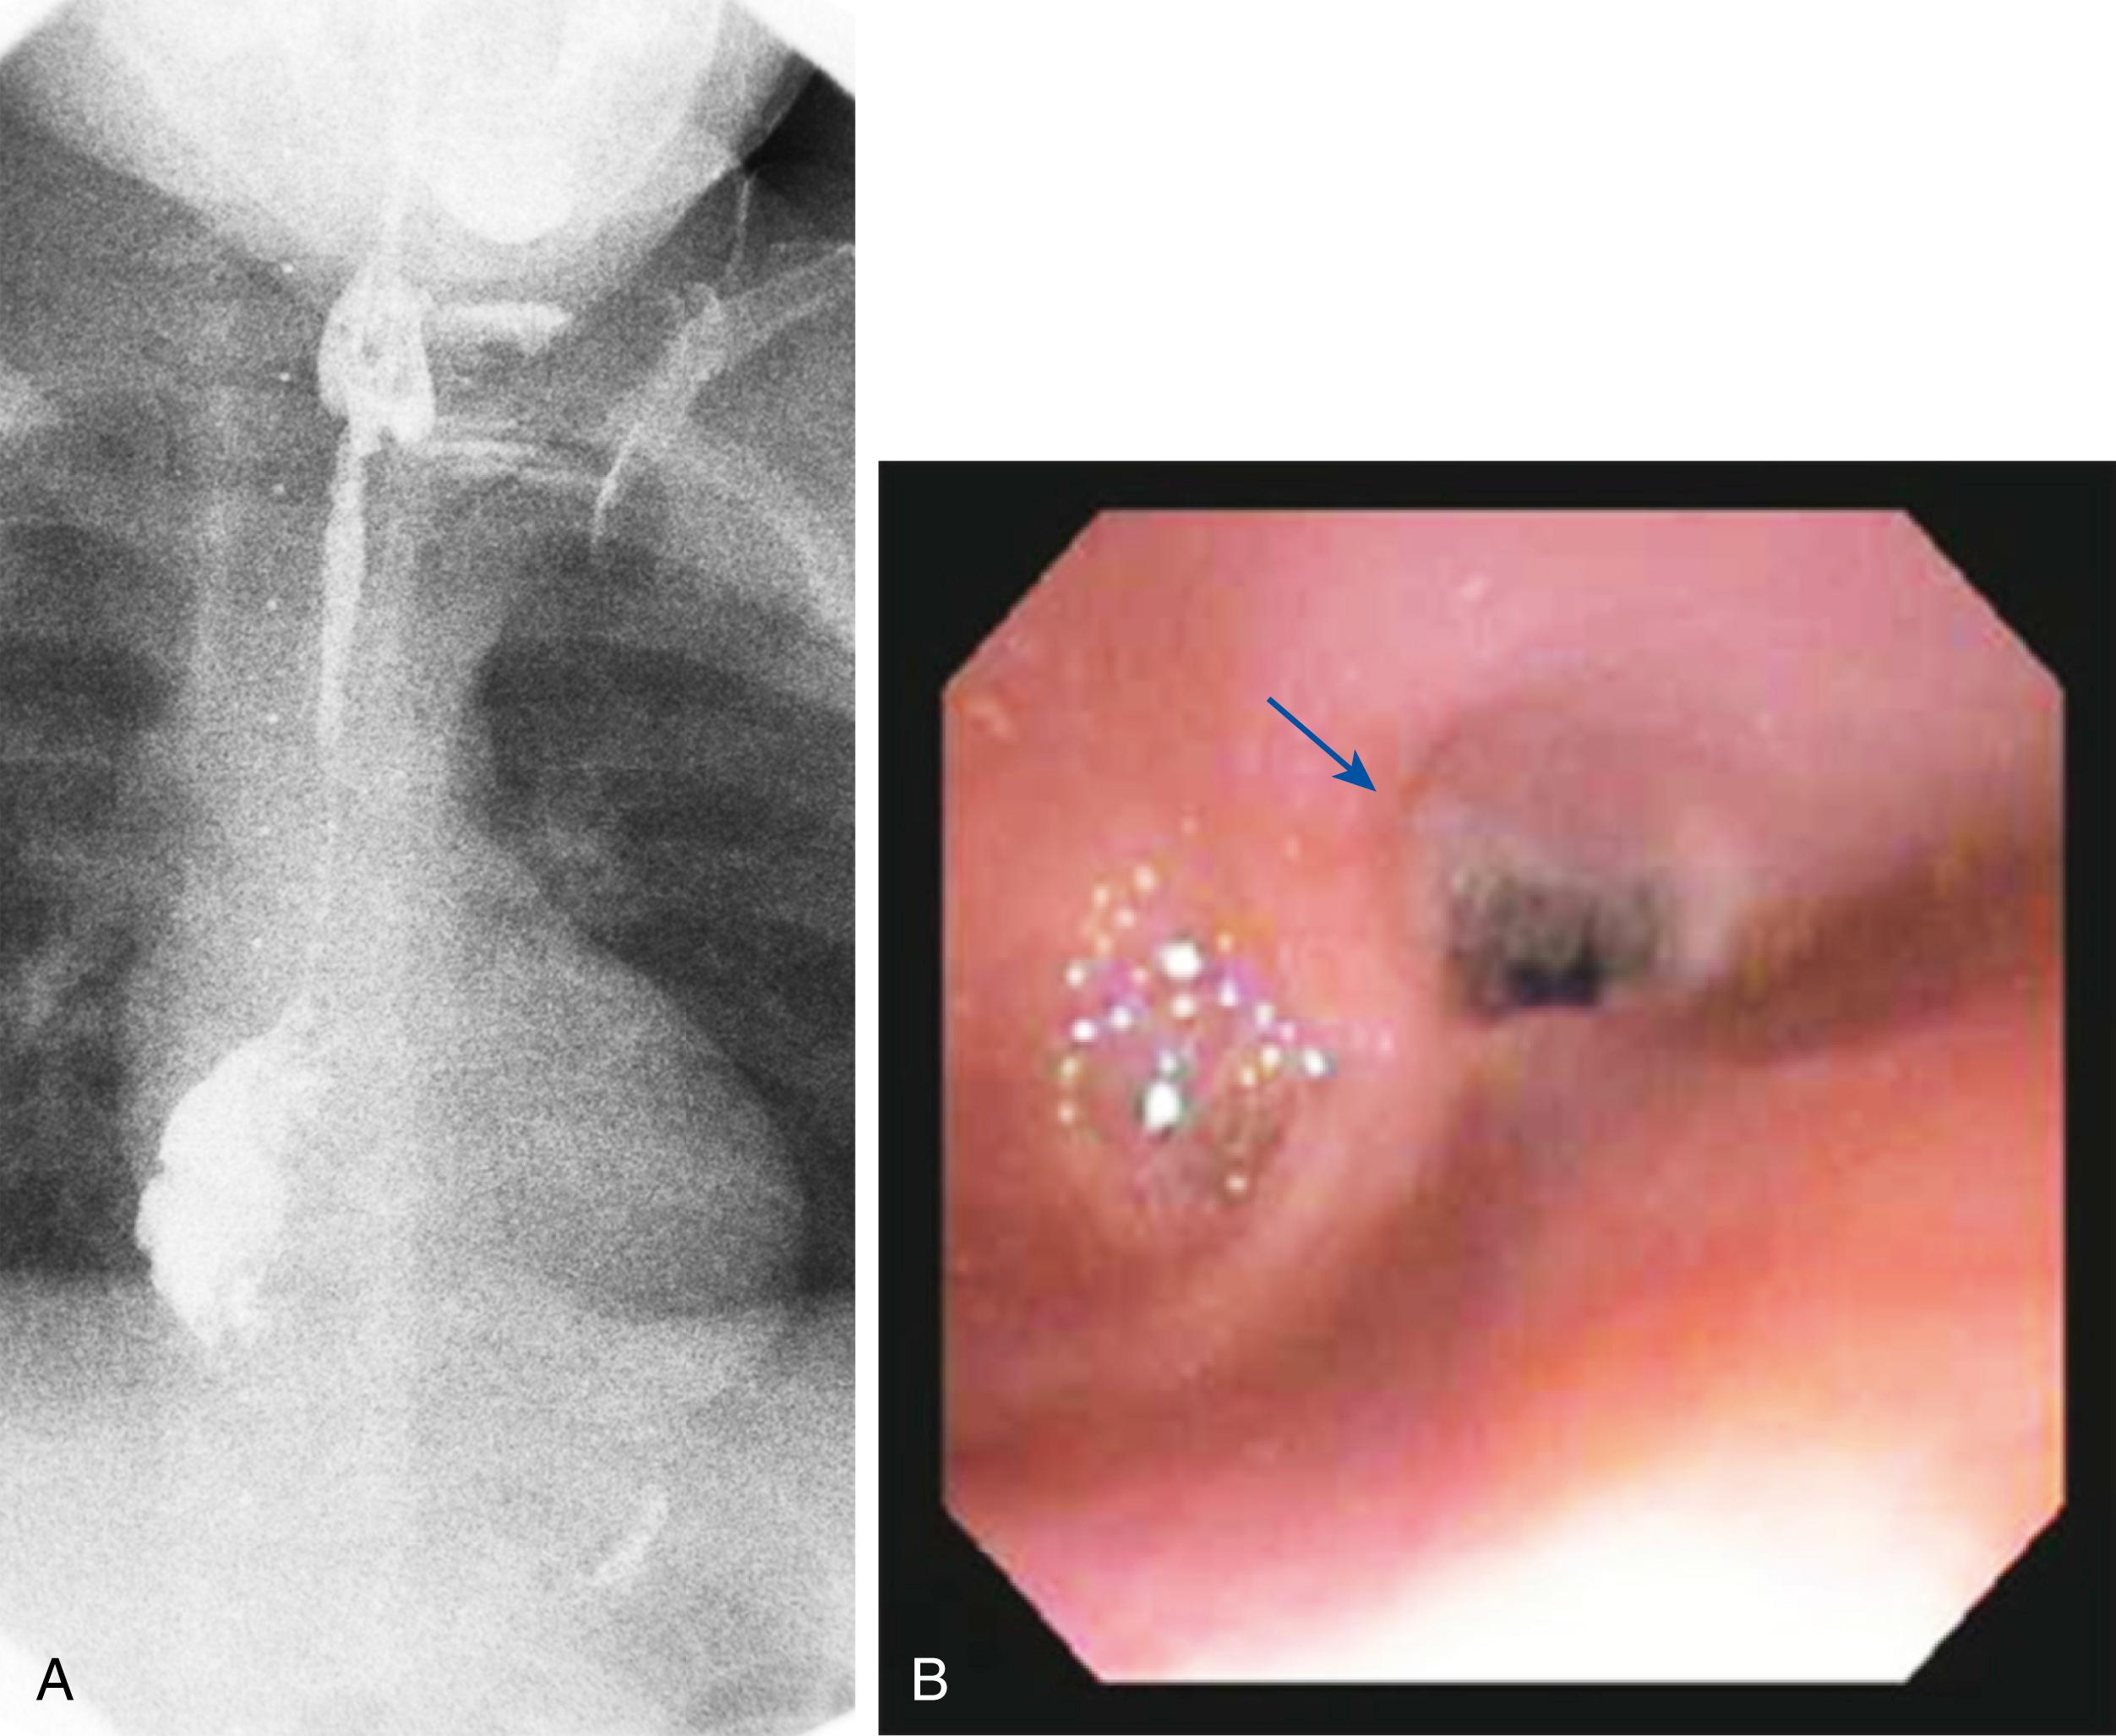 Fig. 18.1, (A and B) Esophagram of a 5-year-old boy demonstrating a long stricture after a lye ingestion. (B) Endoscopic view of the same patient in the proximal esophagus looking at the top of the stricture. The arrow is pointing to the area of the stricture.